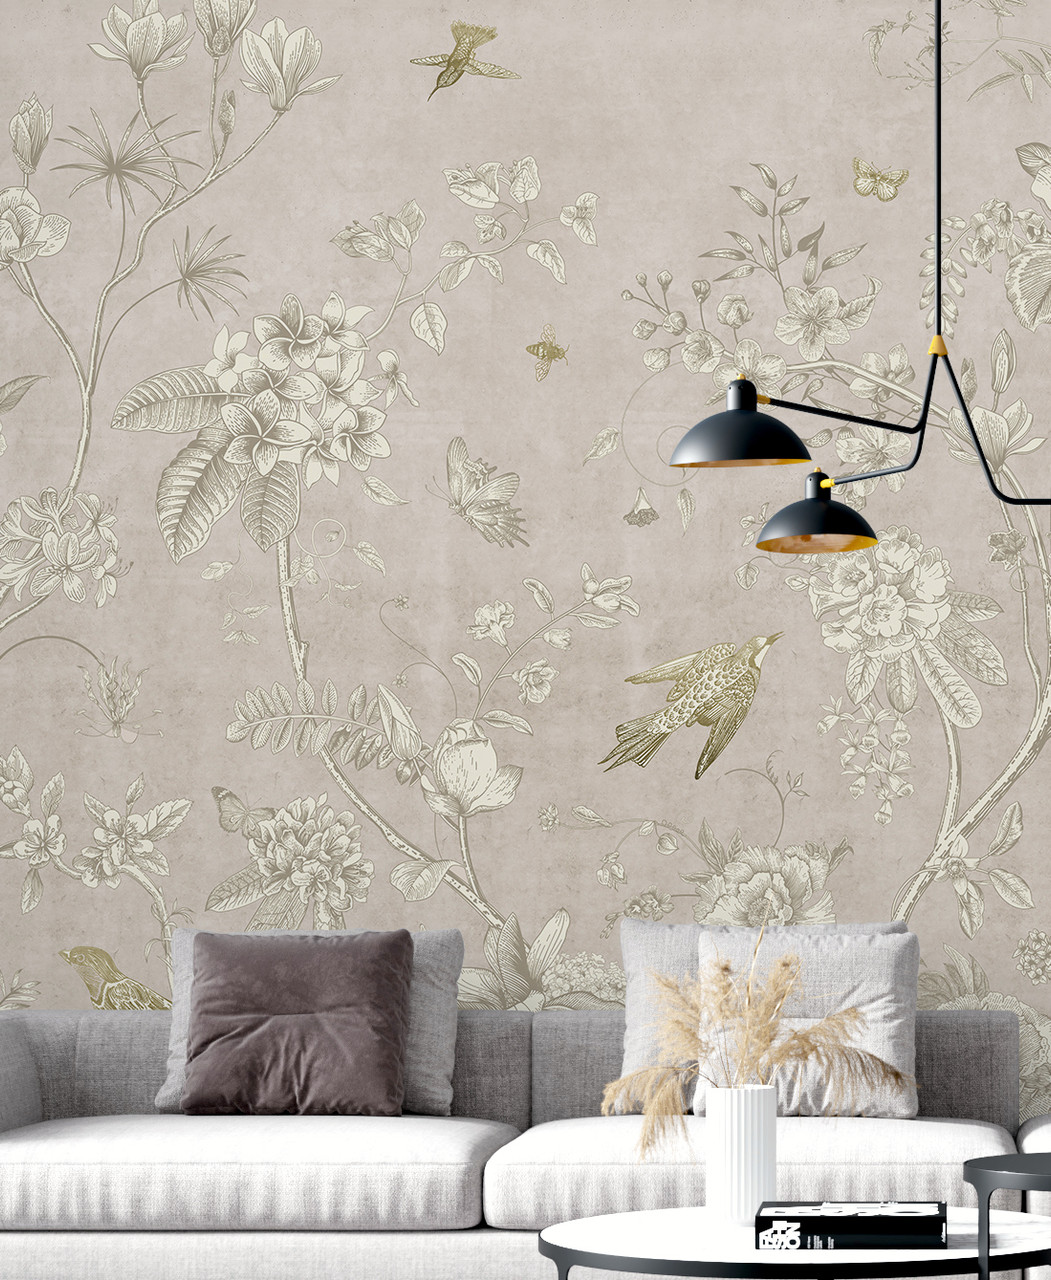 Chinoiserie Bird and Tree Branches Wallpaper Mural | Dusty Pink and ...